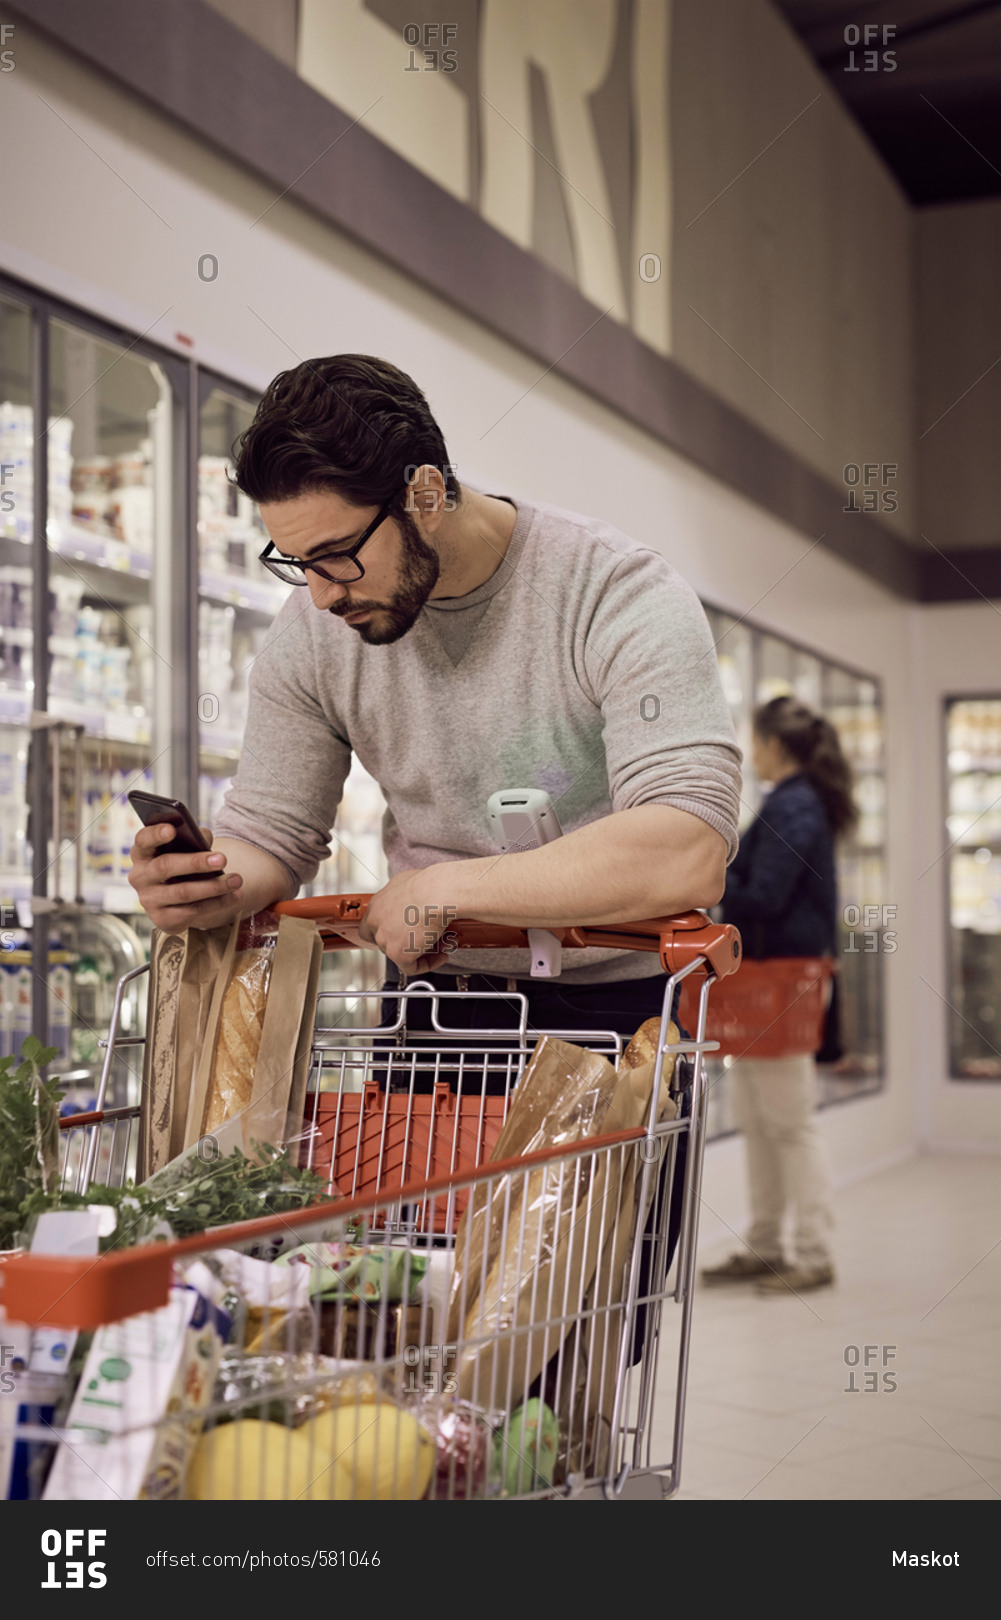 Man text messaging while leaning on shopping cart at refrigerated section in supermarket